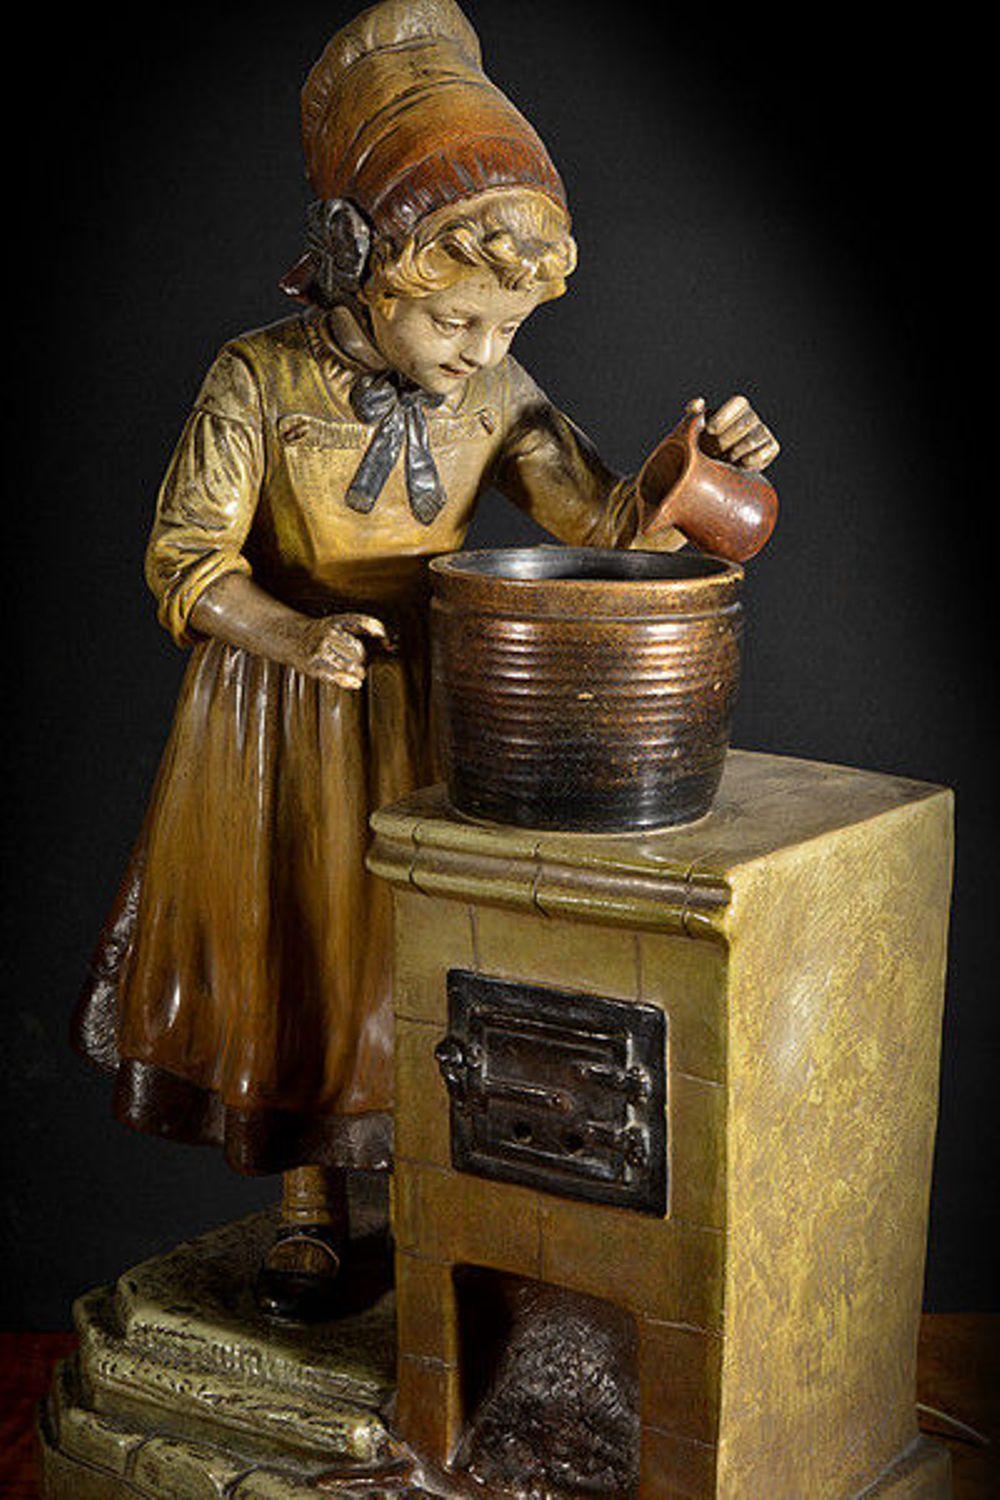 An unusual painted metal lamp depicting a young girl pouring the contents of a small jug into a large pot which sits on a stove.

The girl, wearing an apron over a dress, Mary Anne shoes and a bonnet with a ribbon tied to one side, looks happily